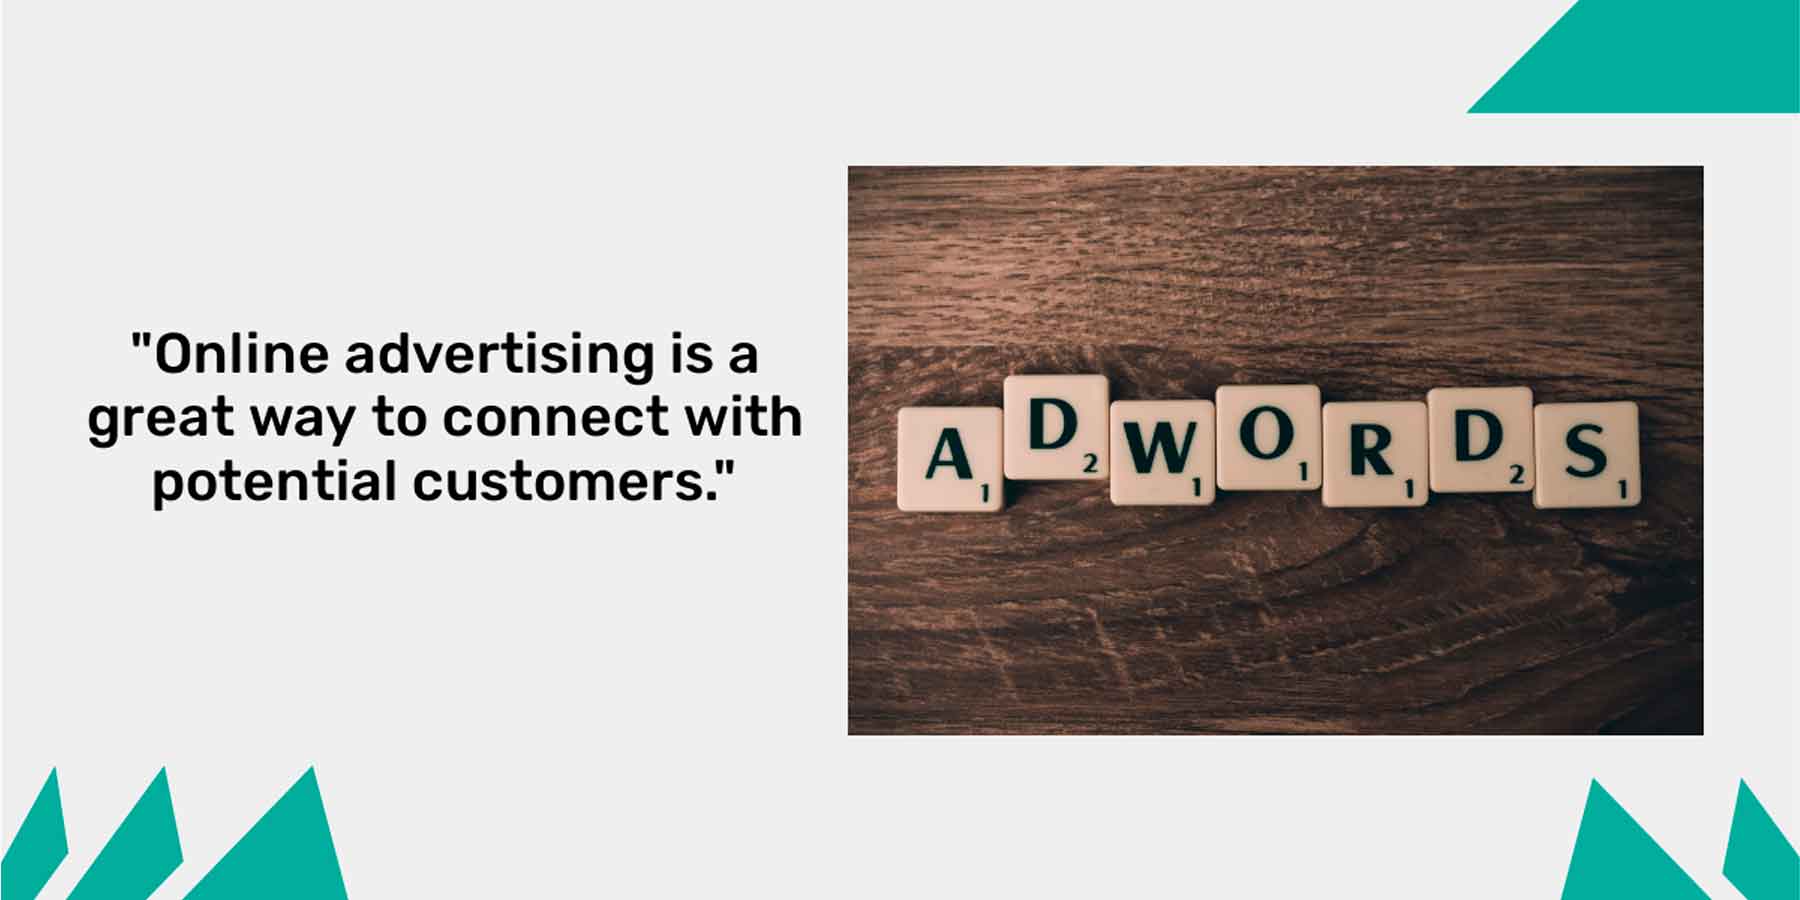 Online advertising is a great way to connect with potential customers